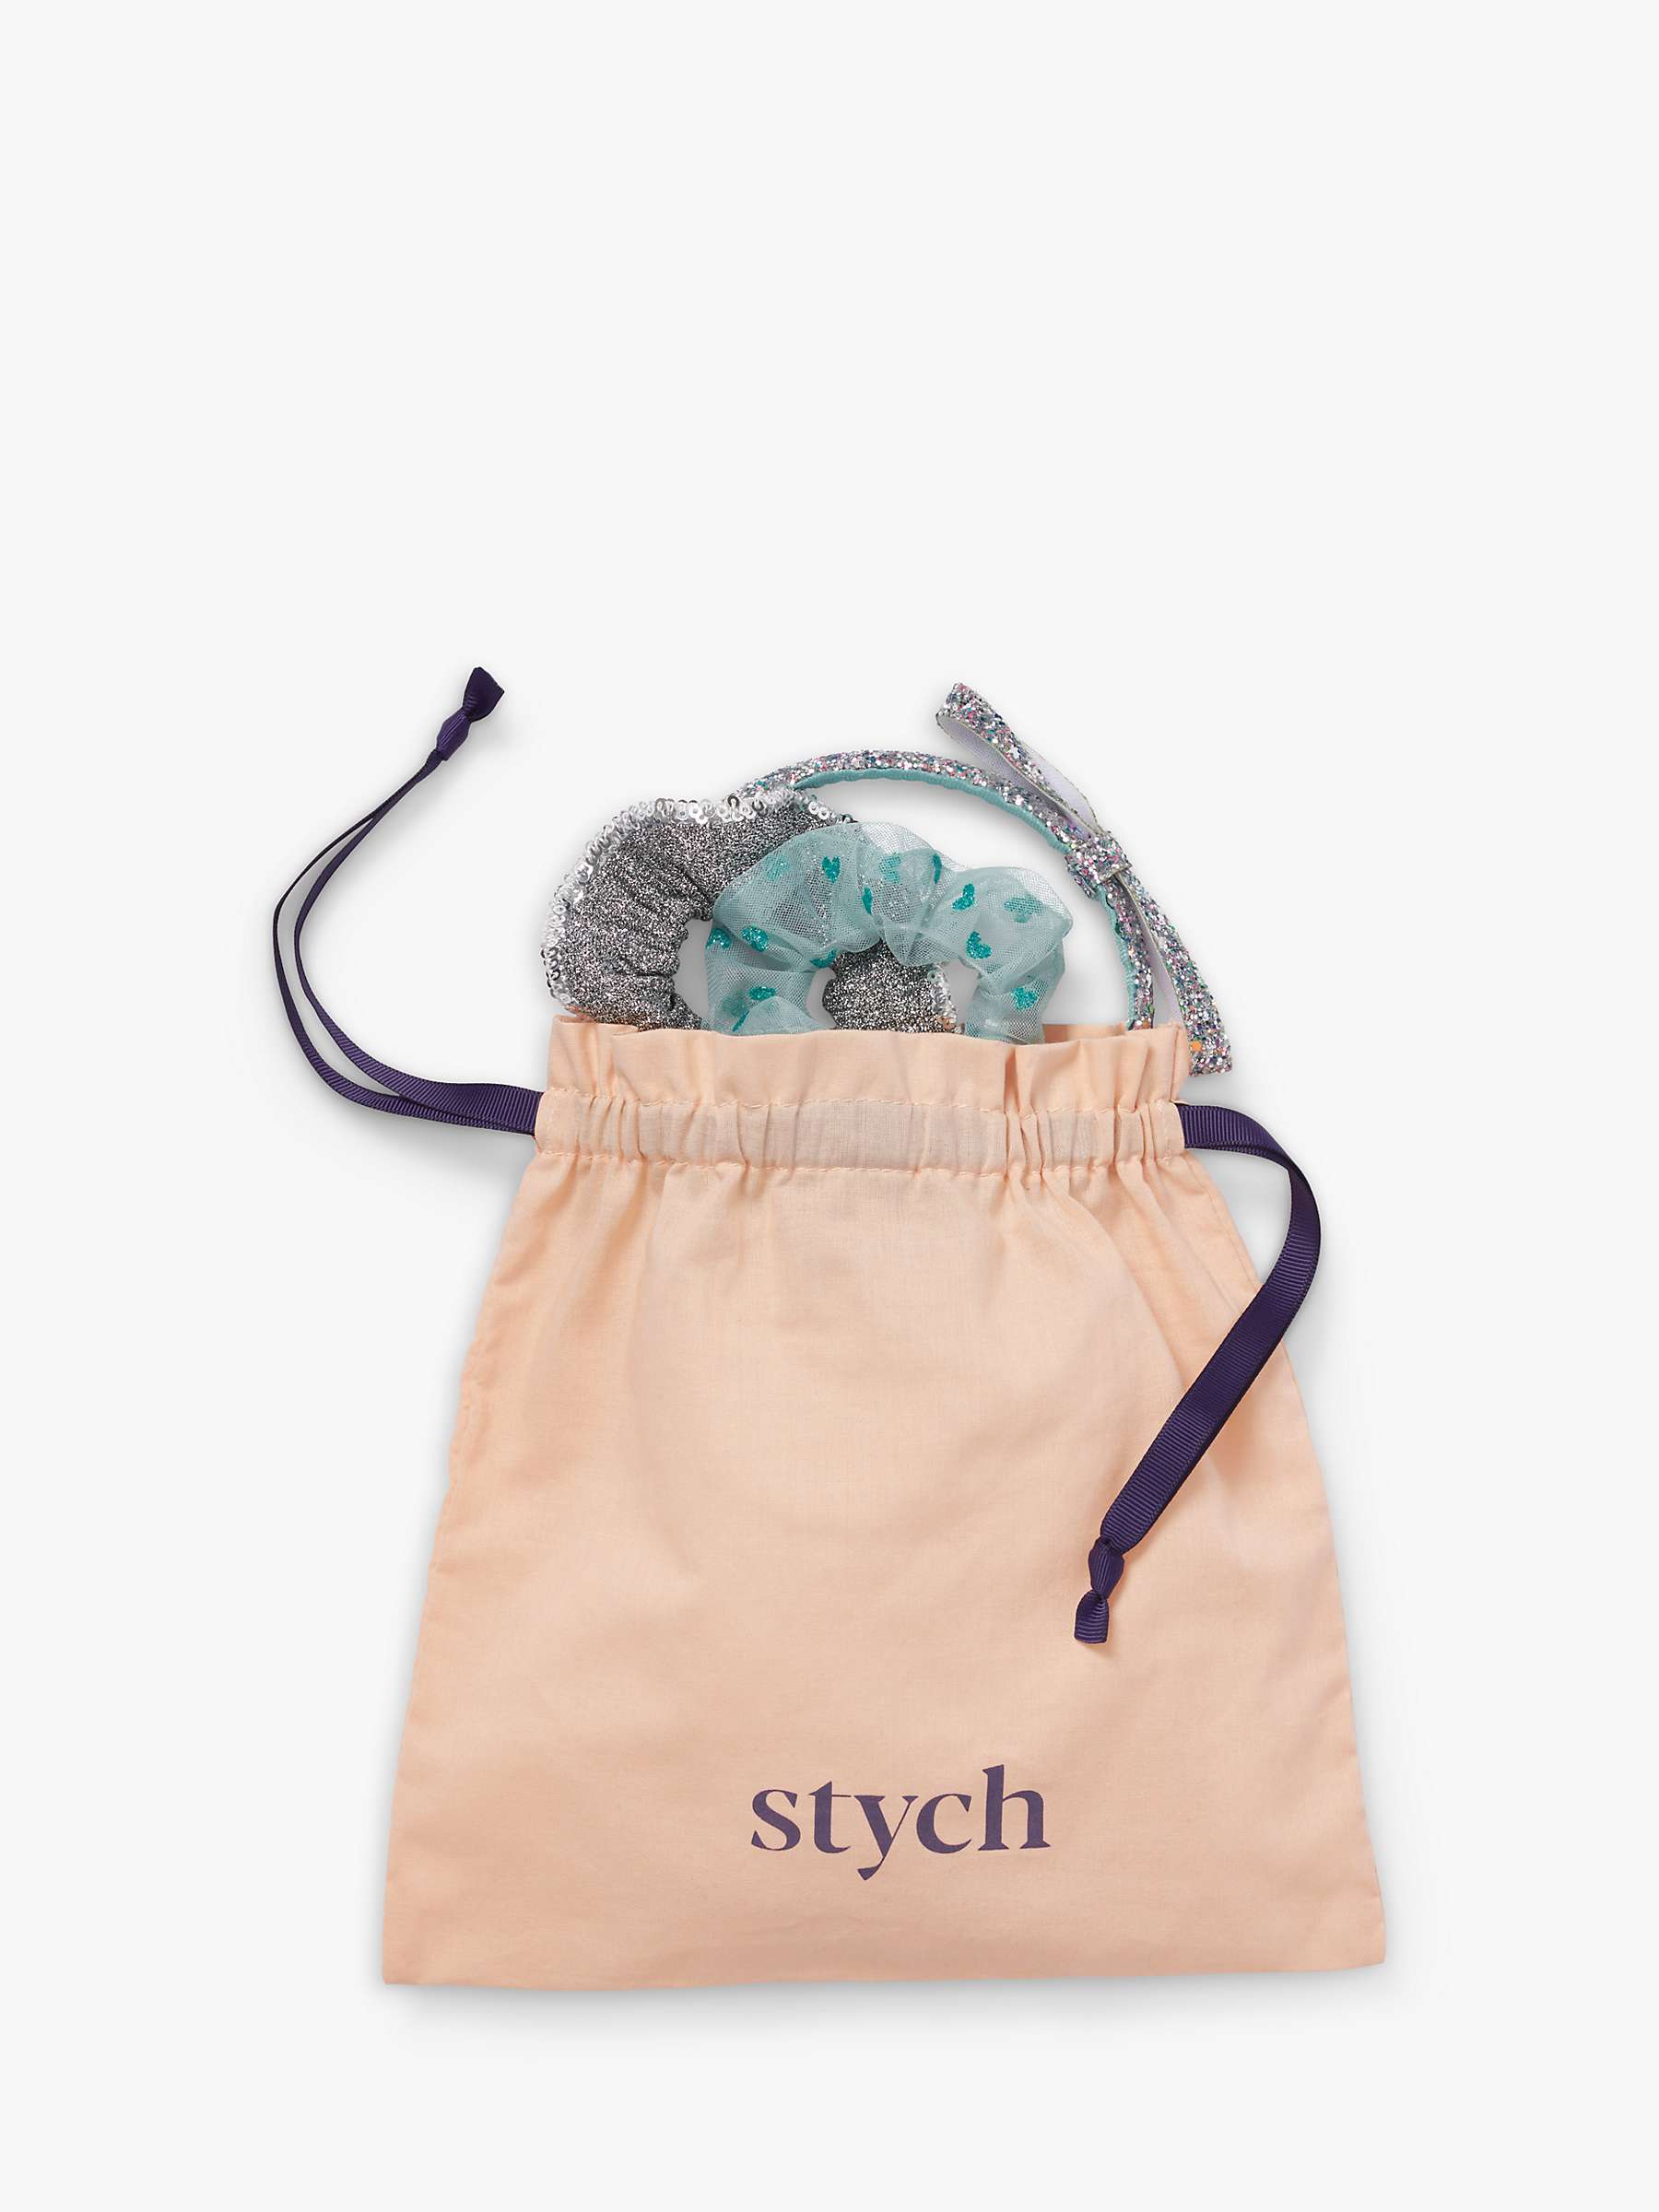 Buy Stych Kids' Hair Accessory Gift Bag Set Online at johnlewis.com